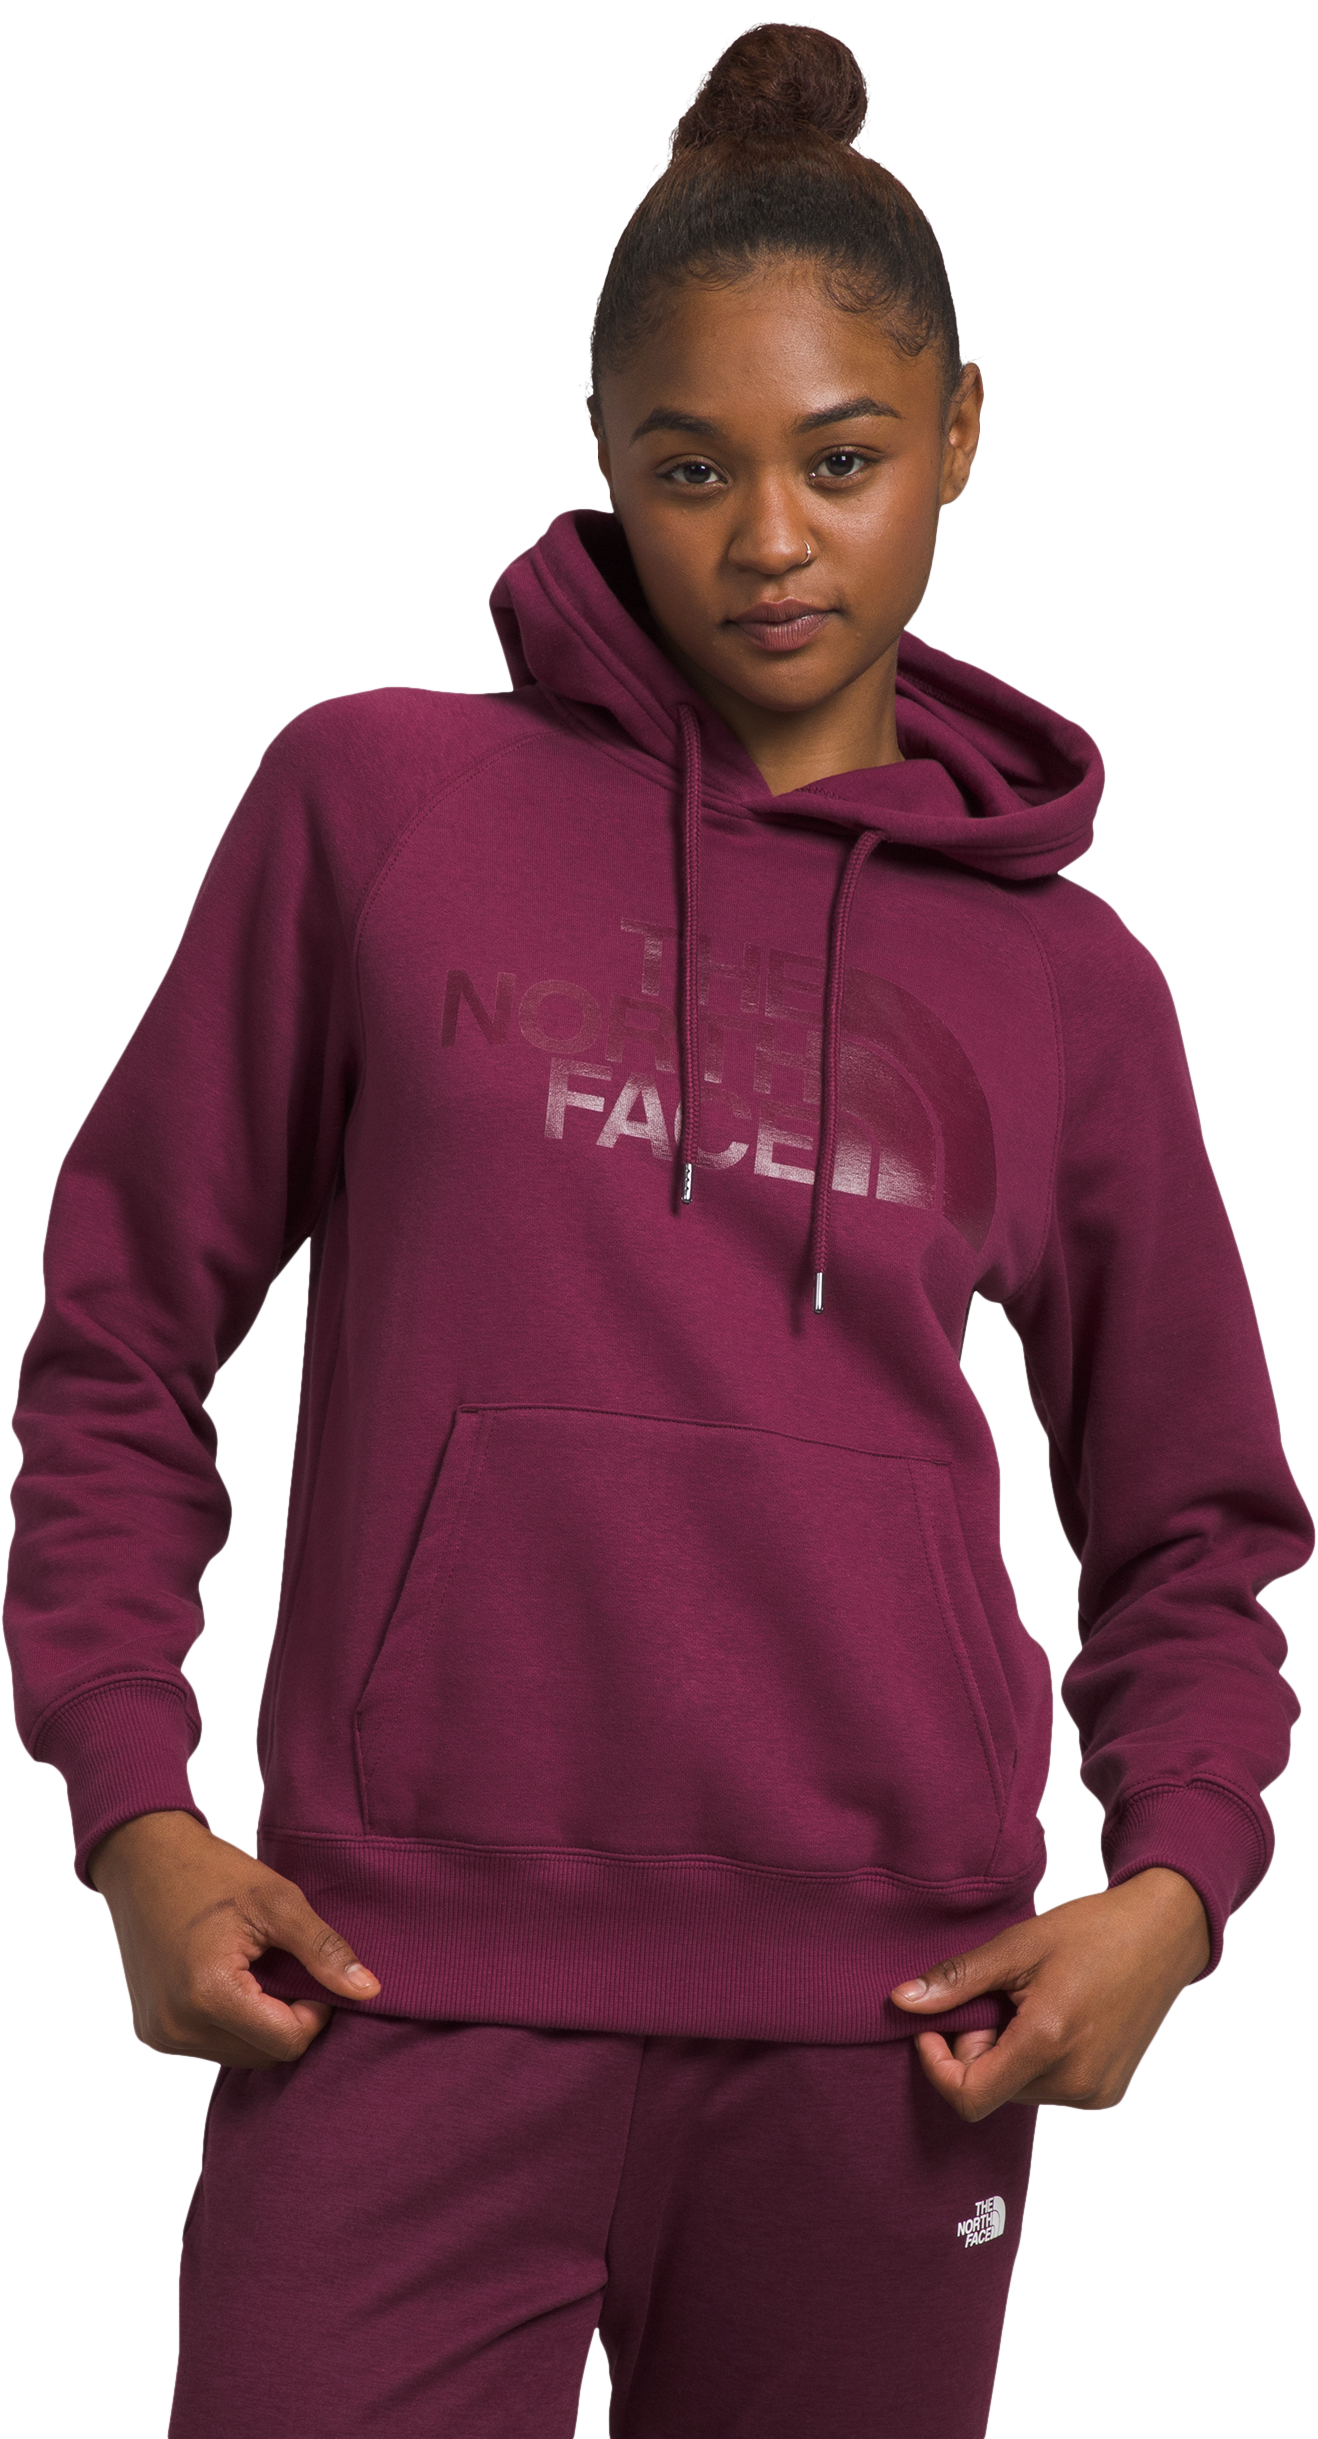 The North Face Half Dome Pullover Long-Sleeve Hoodie for Ladies